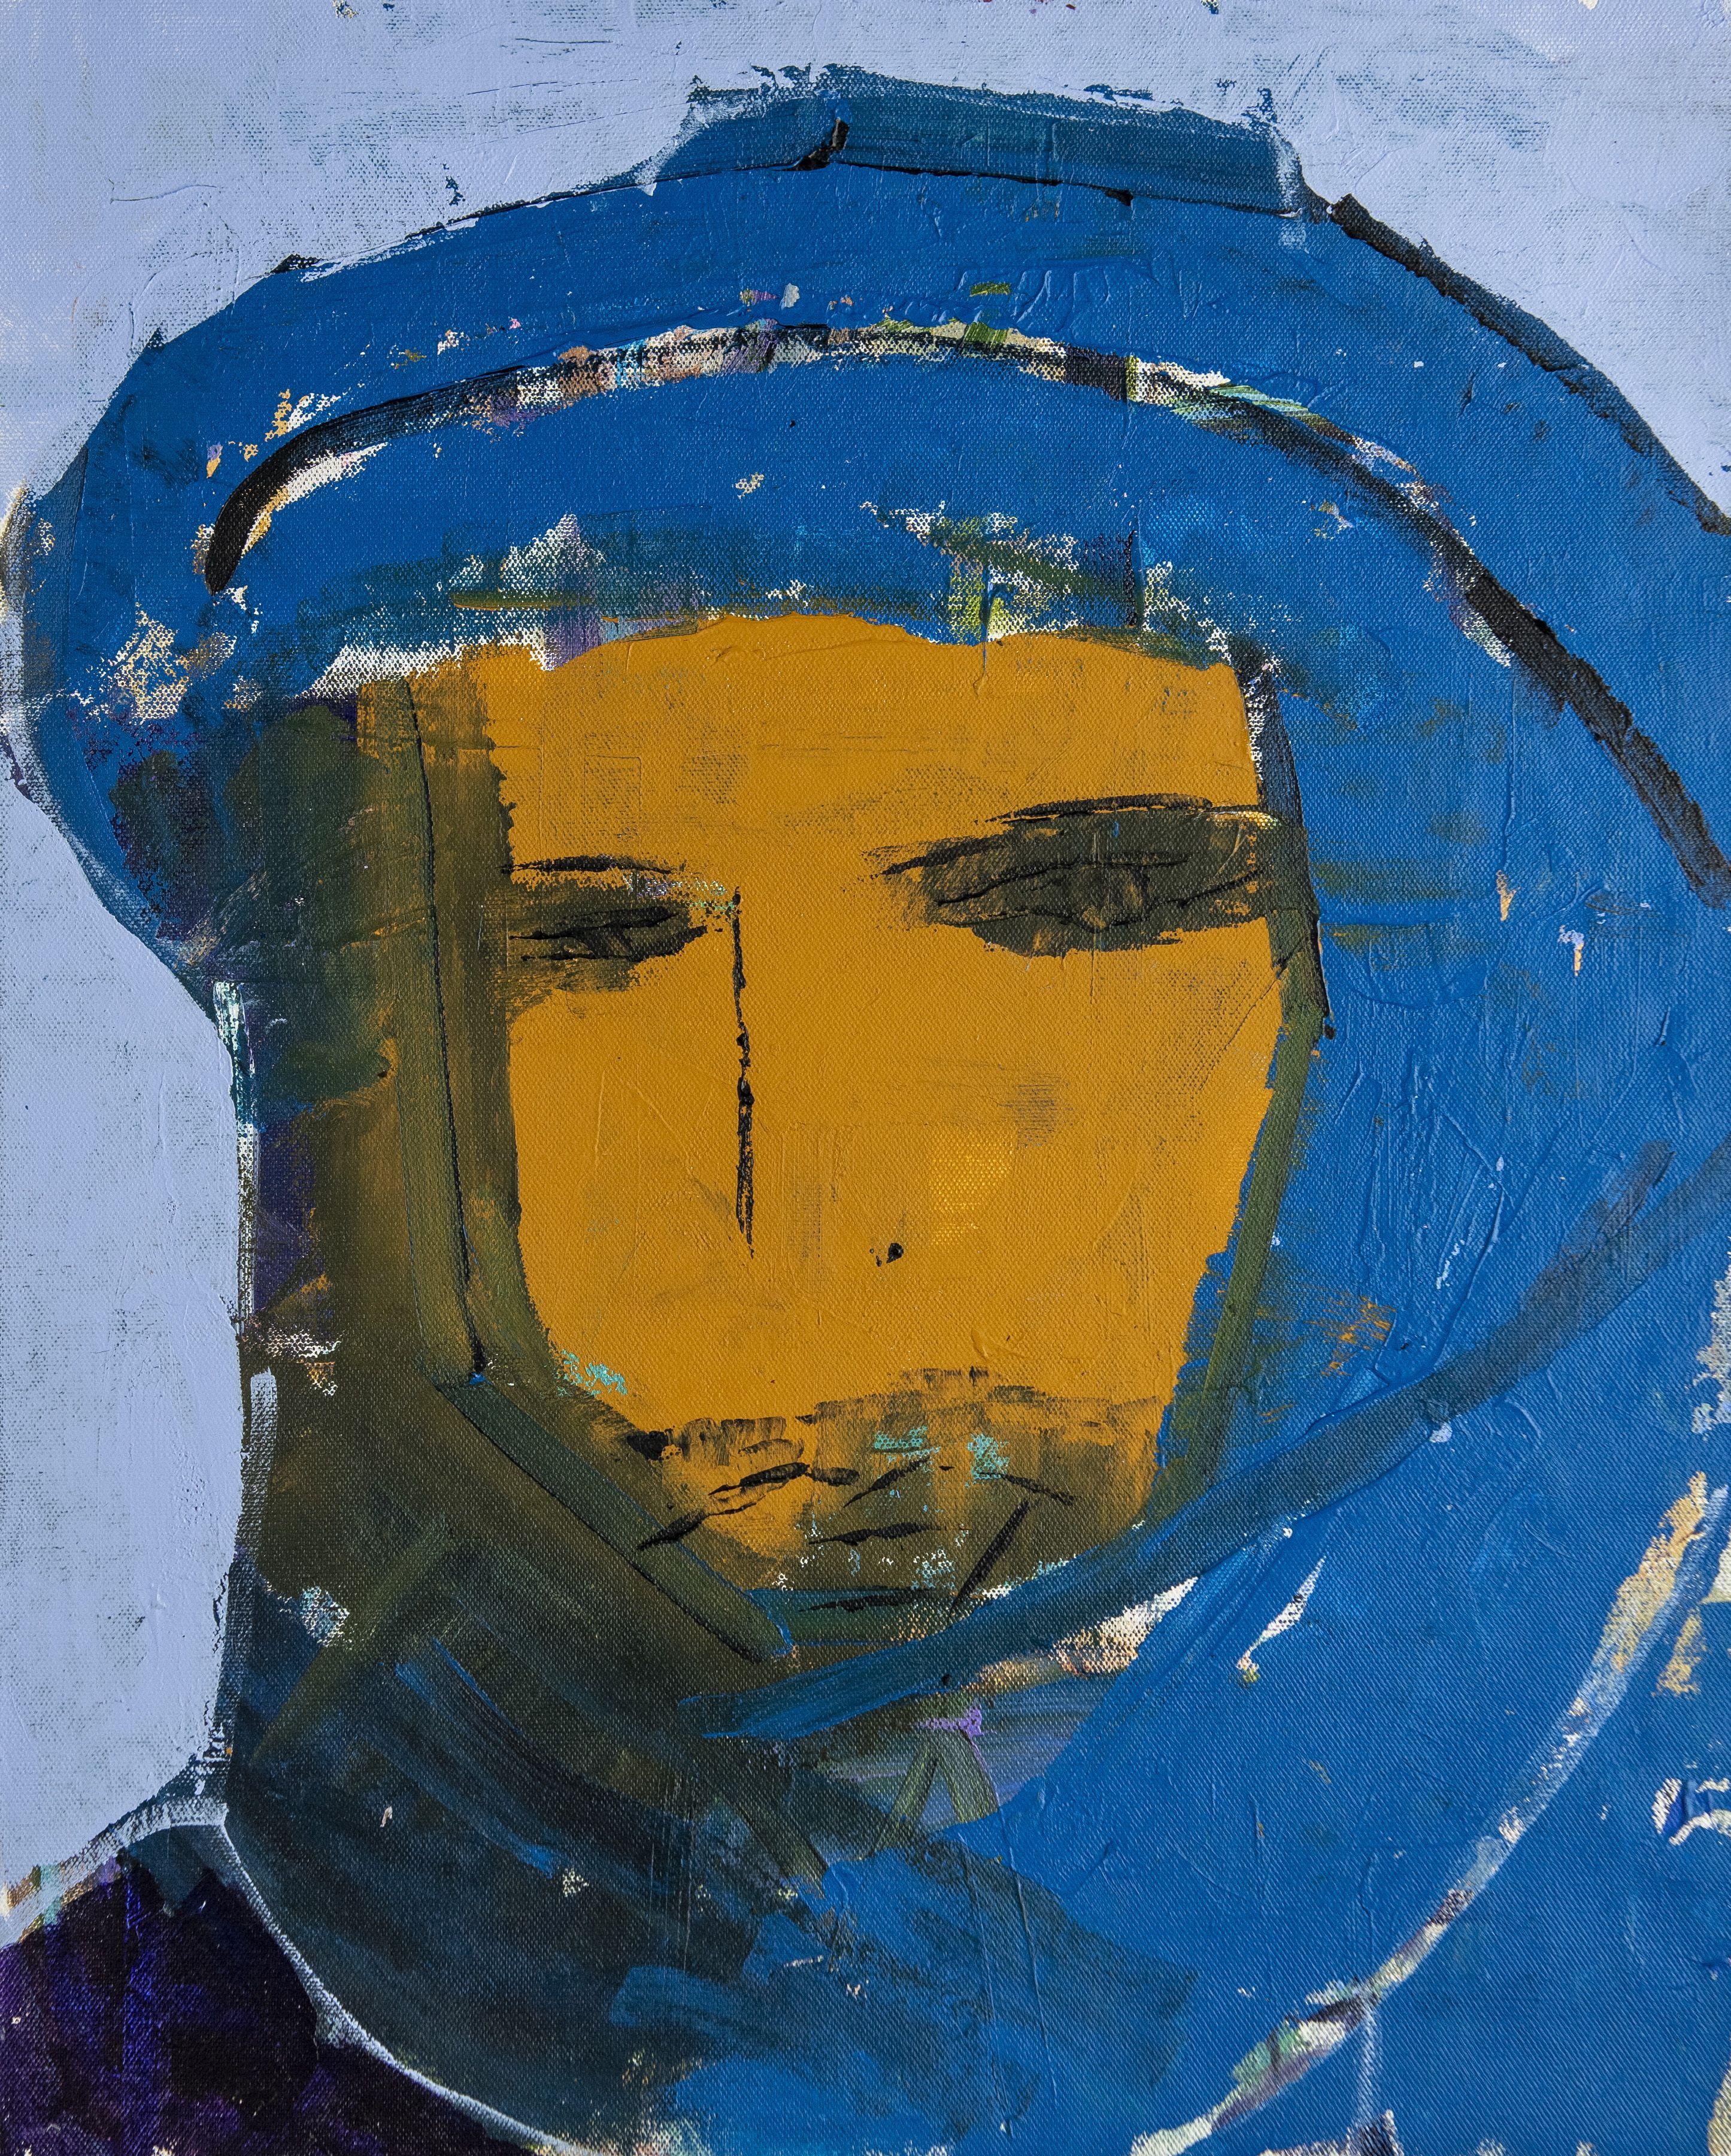 This work is part of a series of portraits of friends/strangers painted after an extended stay in Morocco.  The work is typical of the artist's expressionist style and was part of the show he was working on when he died. It demonstrates the